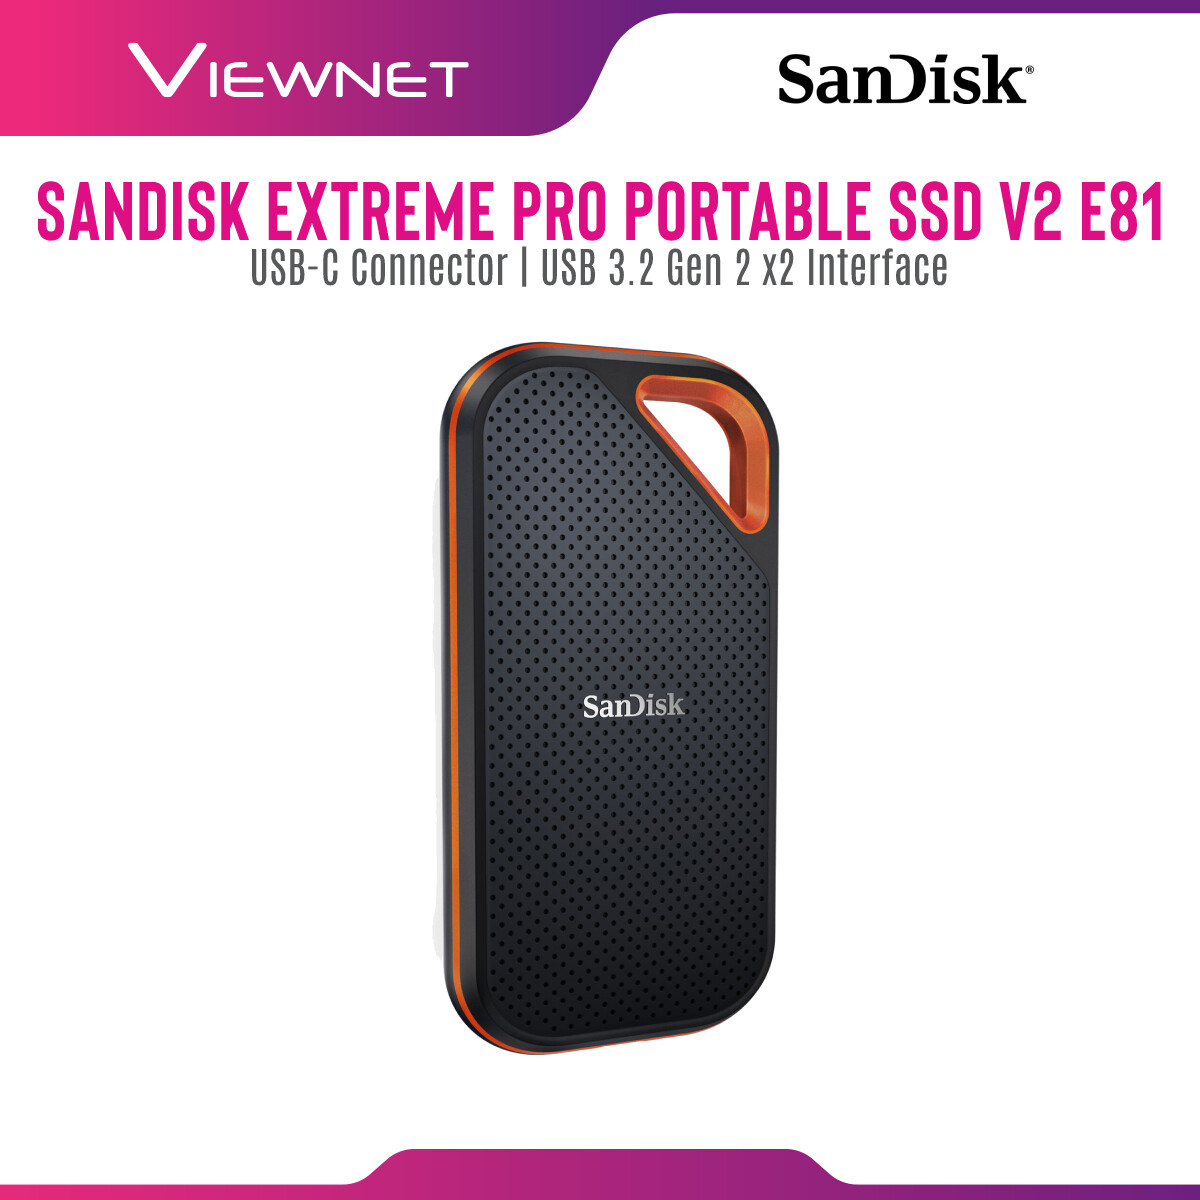 SanDisk Extreme PRO Portable SSD V2, 2TB 2000MB/s E81 USB 3.1 for Windows & Mac Type-C Type-A IP55 Dust and Water-Resistant